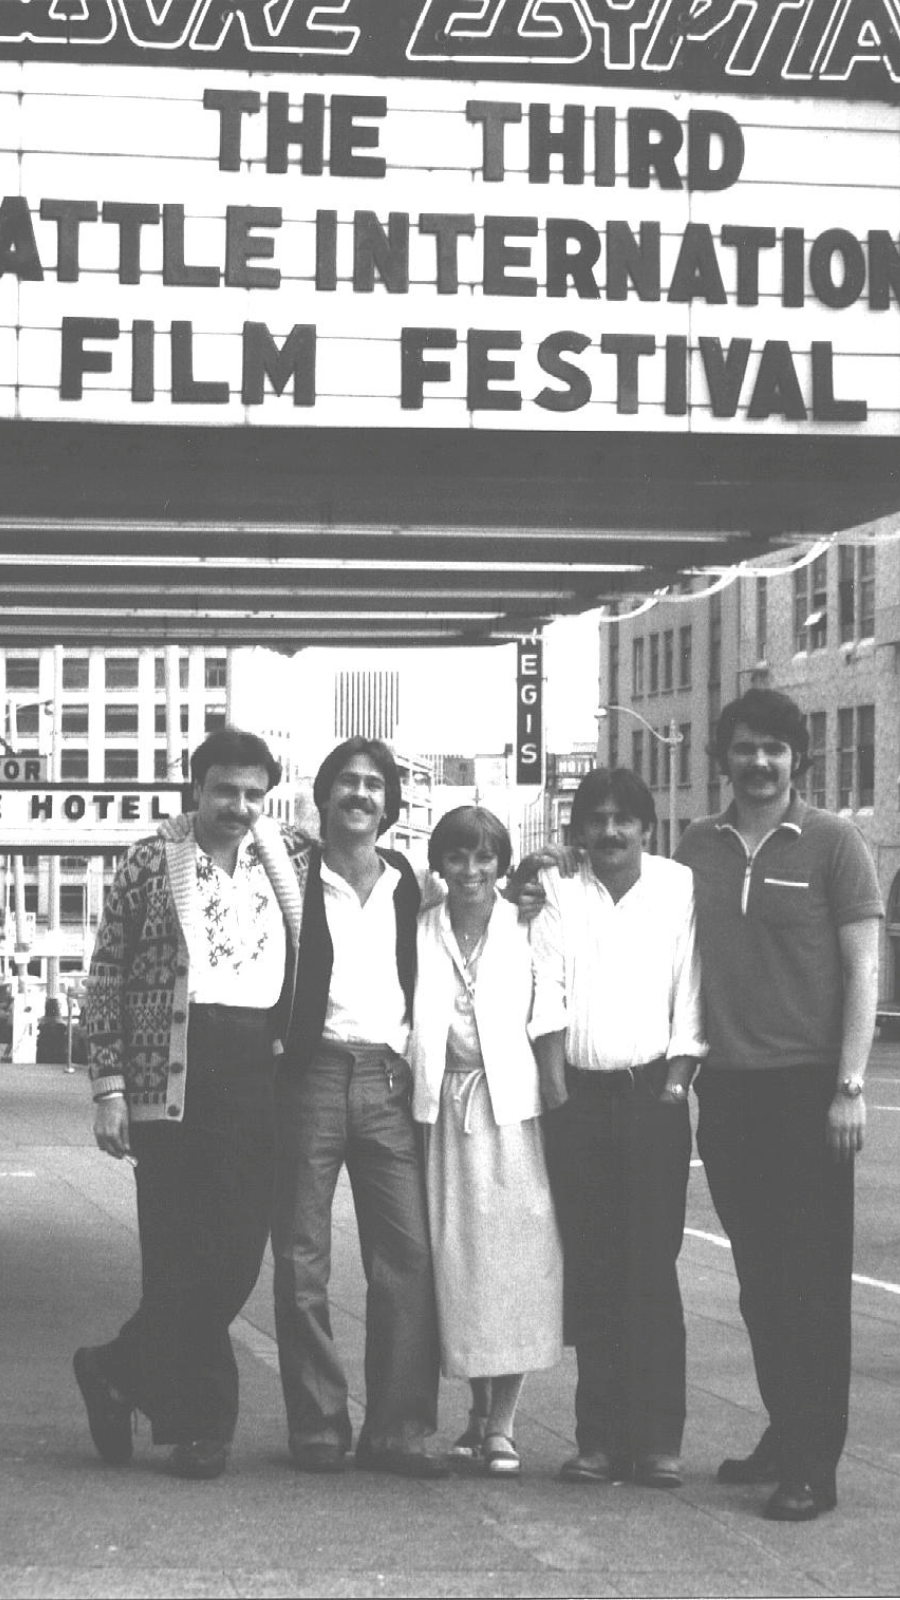 SIFFers, including festival founders, Darryl Macdonald (second from right) and Dan Ireland (second from left), under the Moore Egyptian marquee for the 3rd Seattle International Film Festival